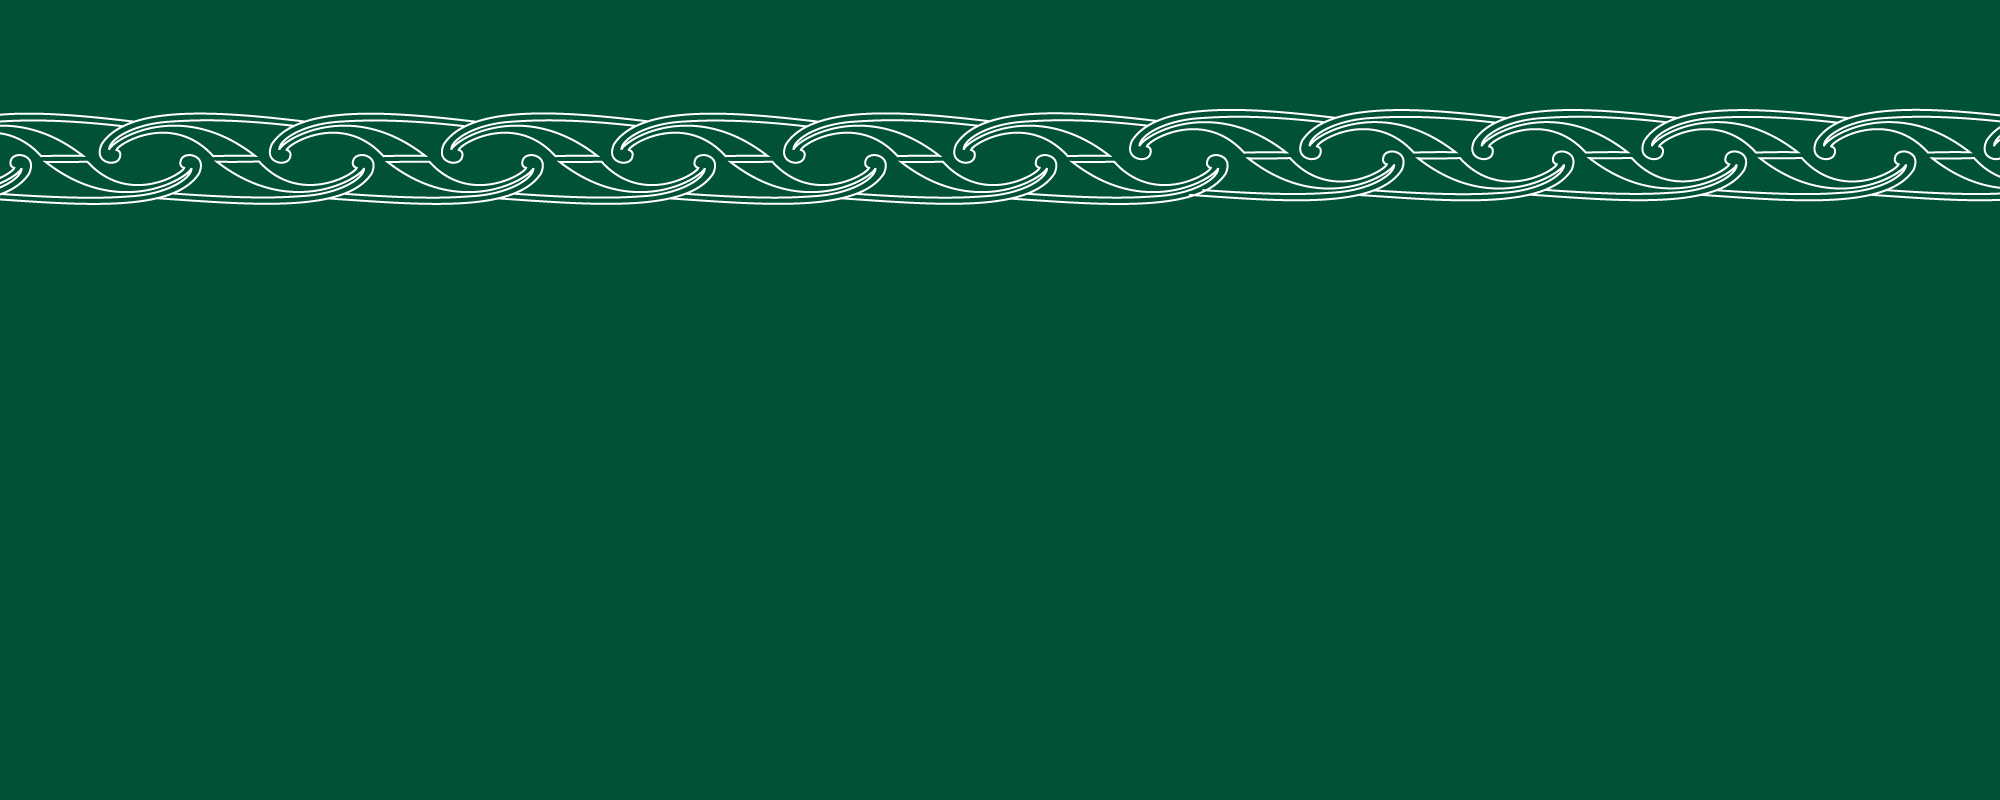 Graphic with dark green background and traditional Maori pattern in white along top.